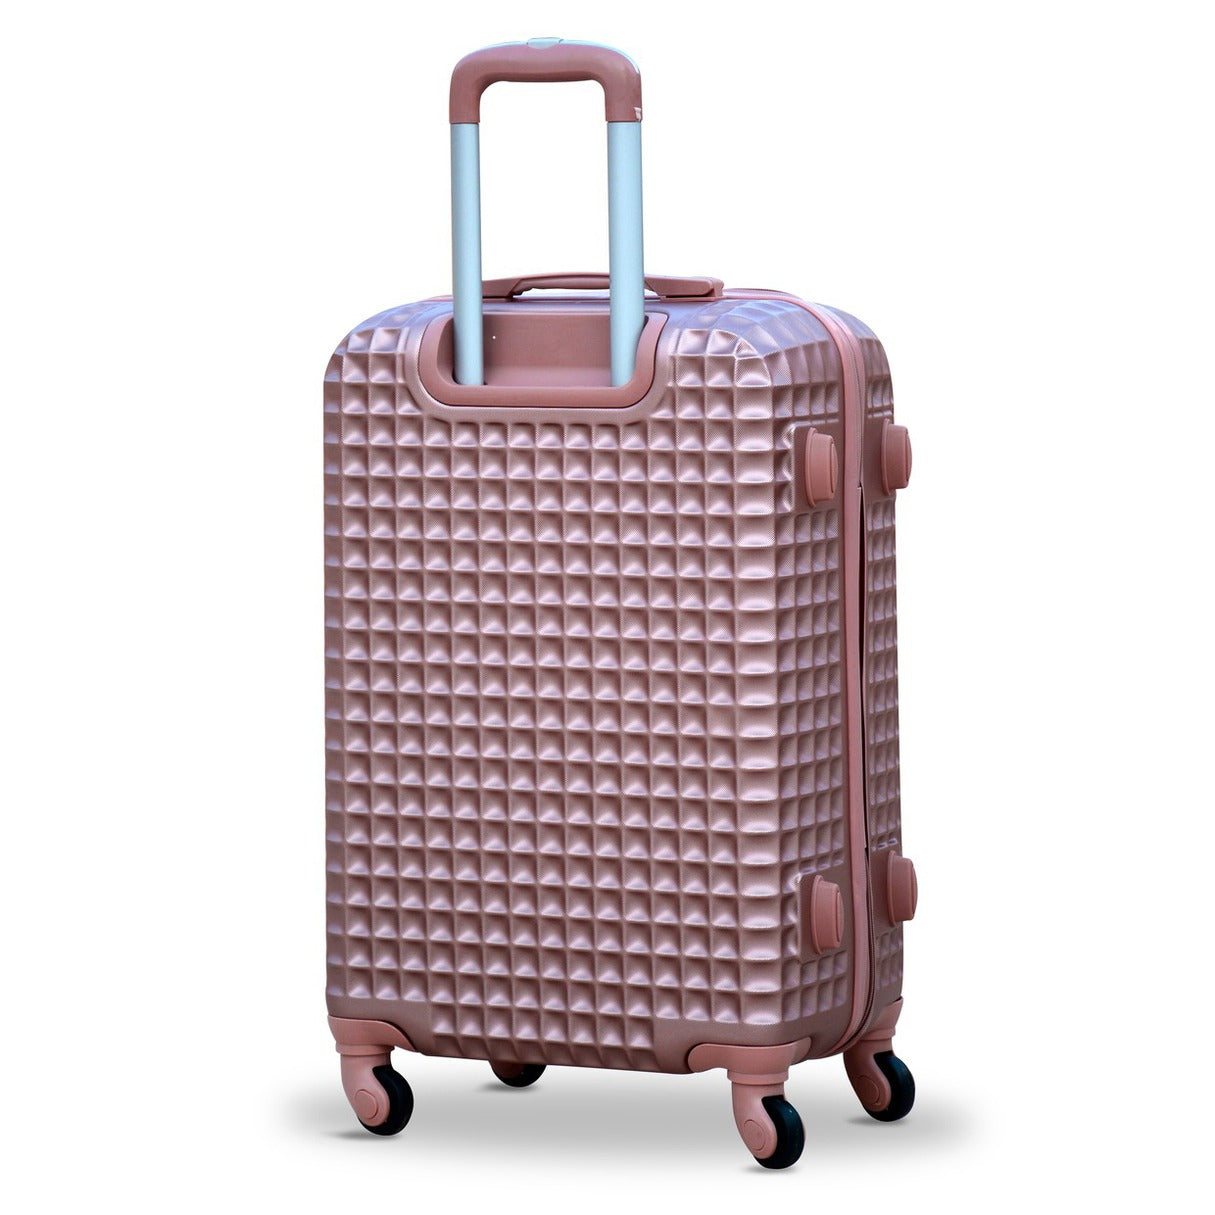 28" Rose Gold Colour Square Cut ABS Luggage Lightweight Hard Case Trolley Bag | 2 Year Warranty